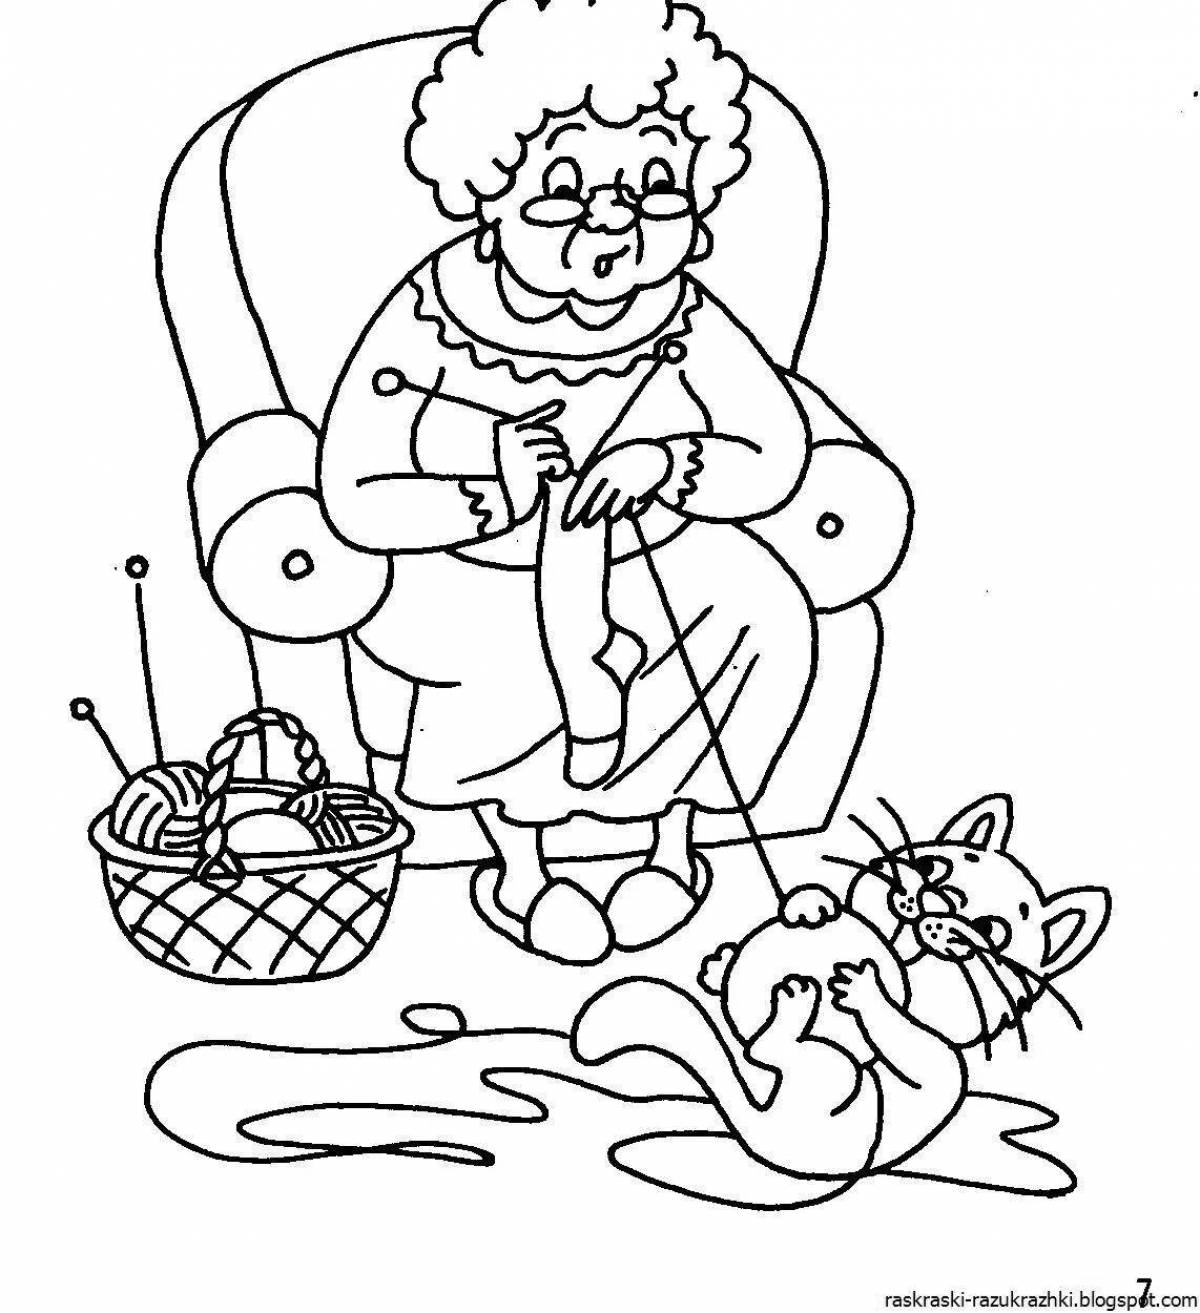 Invigorating coloring book for older people with dementia